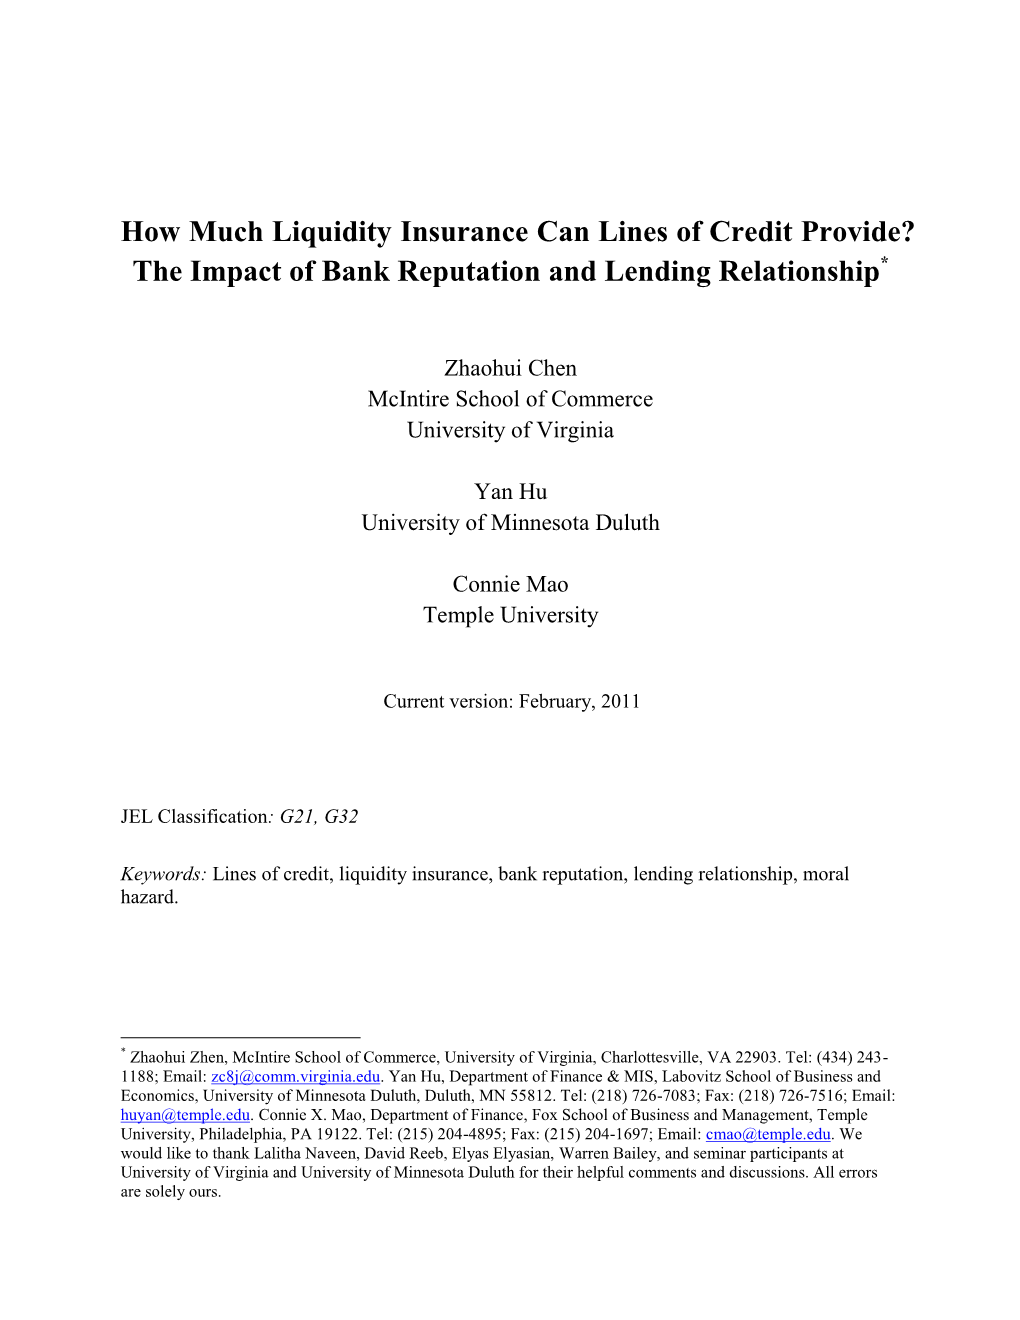 How Much Liquidity Insurance Can Lines of Credit Provide? the Impact of Bank Reputation and Lending Relationship*